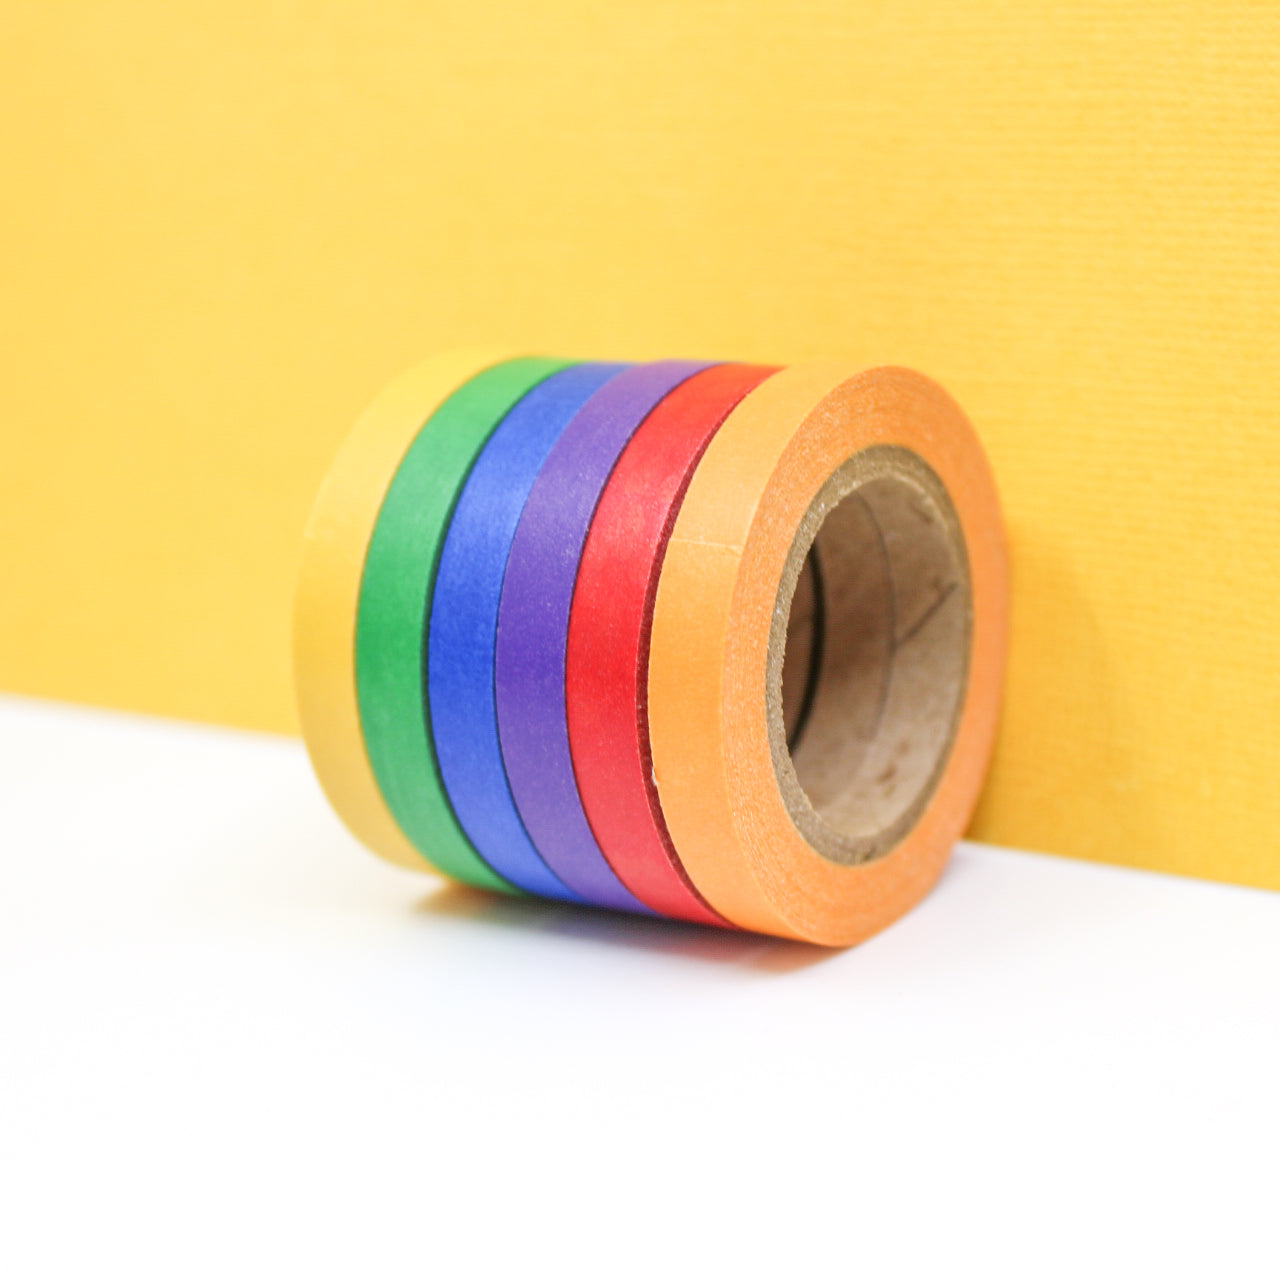 Get creative with our Primary Color Narrow Solid Washi Tape Set. This set includes a collection of narrow washi tapes in bold primary colors, ideal for adding a vibrant and eye-catching touch to your projects. This tape is sold at BBB Supplies Craft Shop.